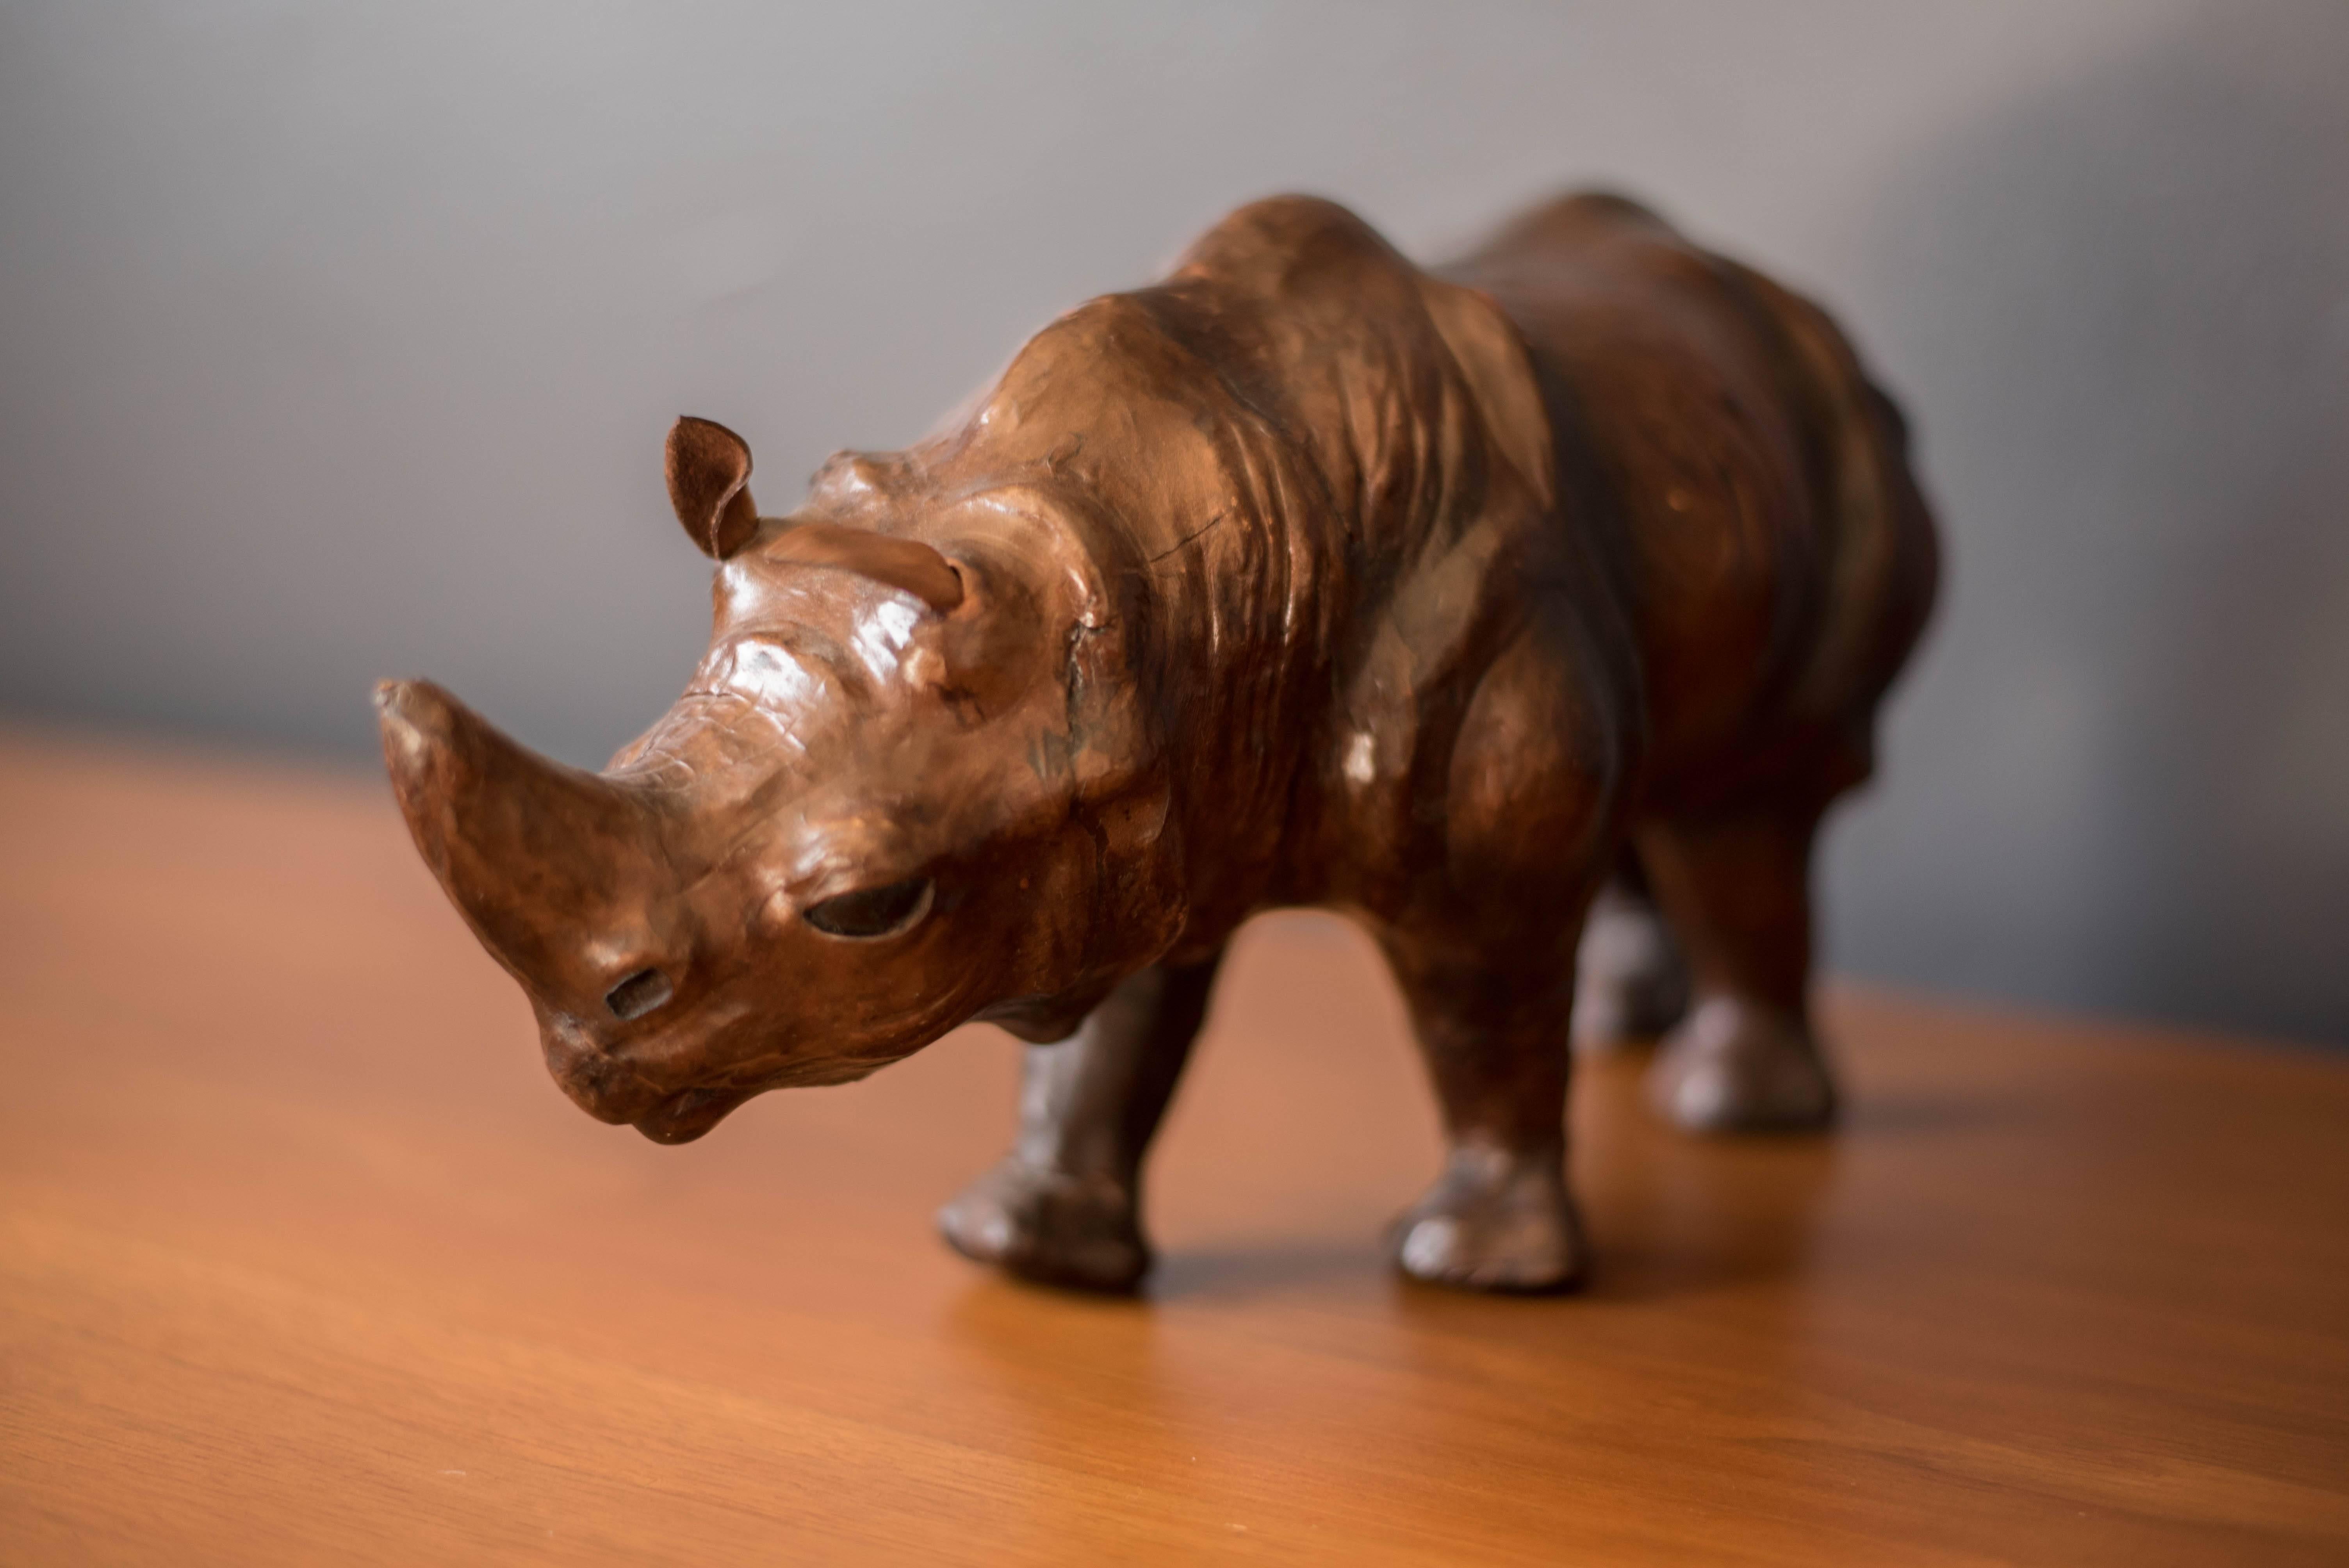 Vintage Mid-Century leather rhinoceros, circa 1960s. This sculpture is made of wood and carved aged leather. 

